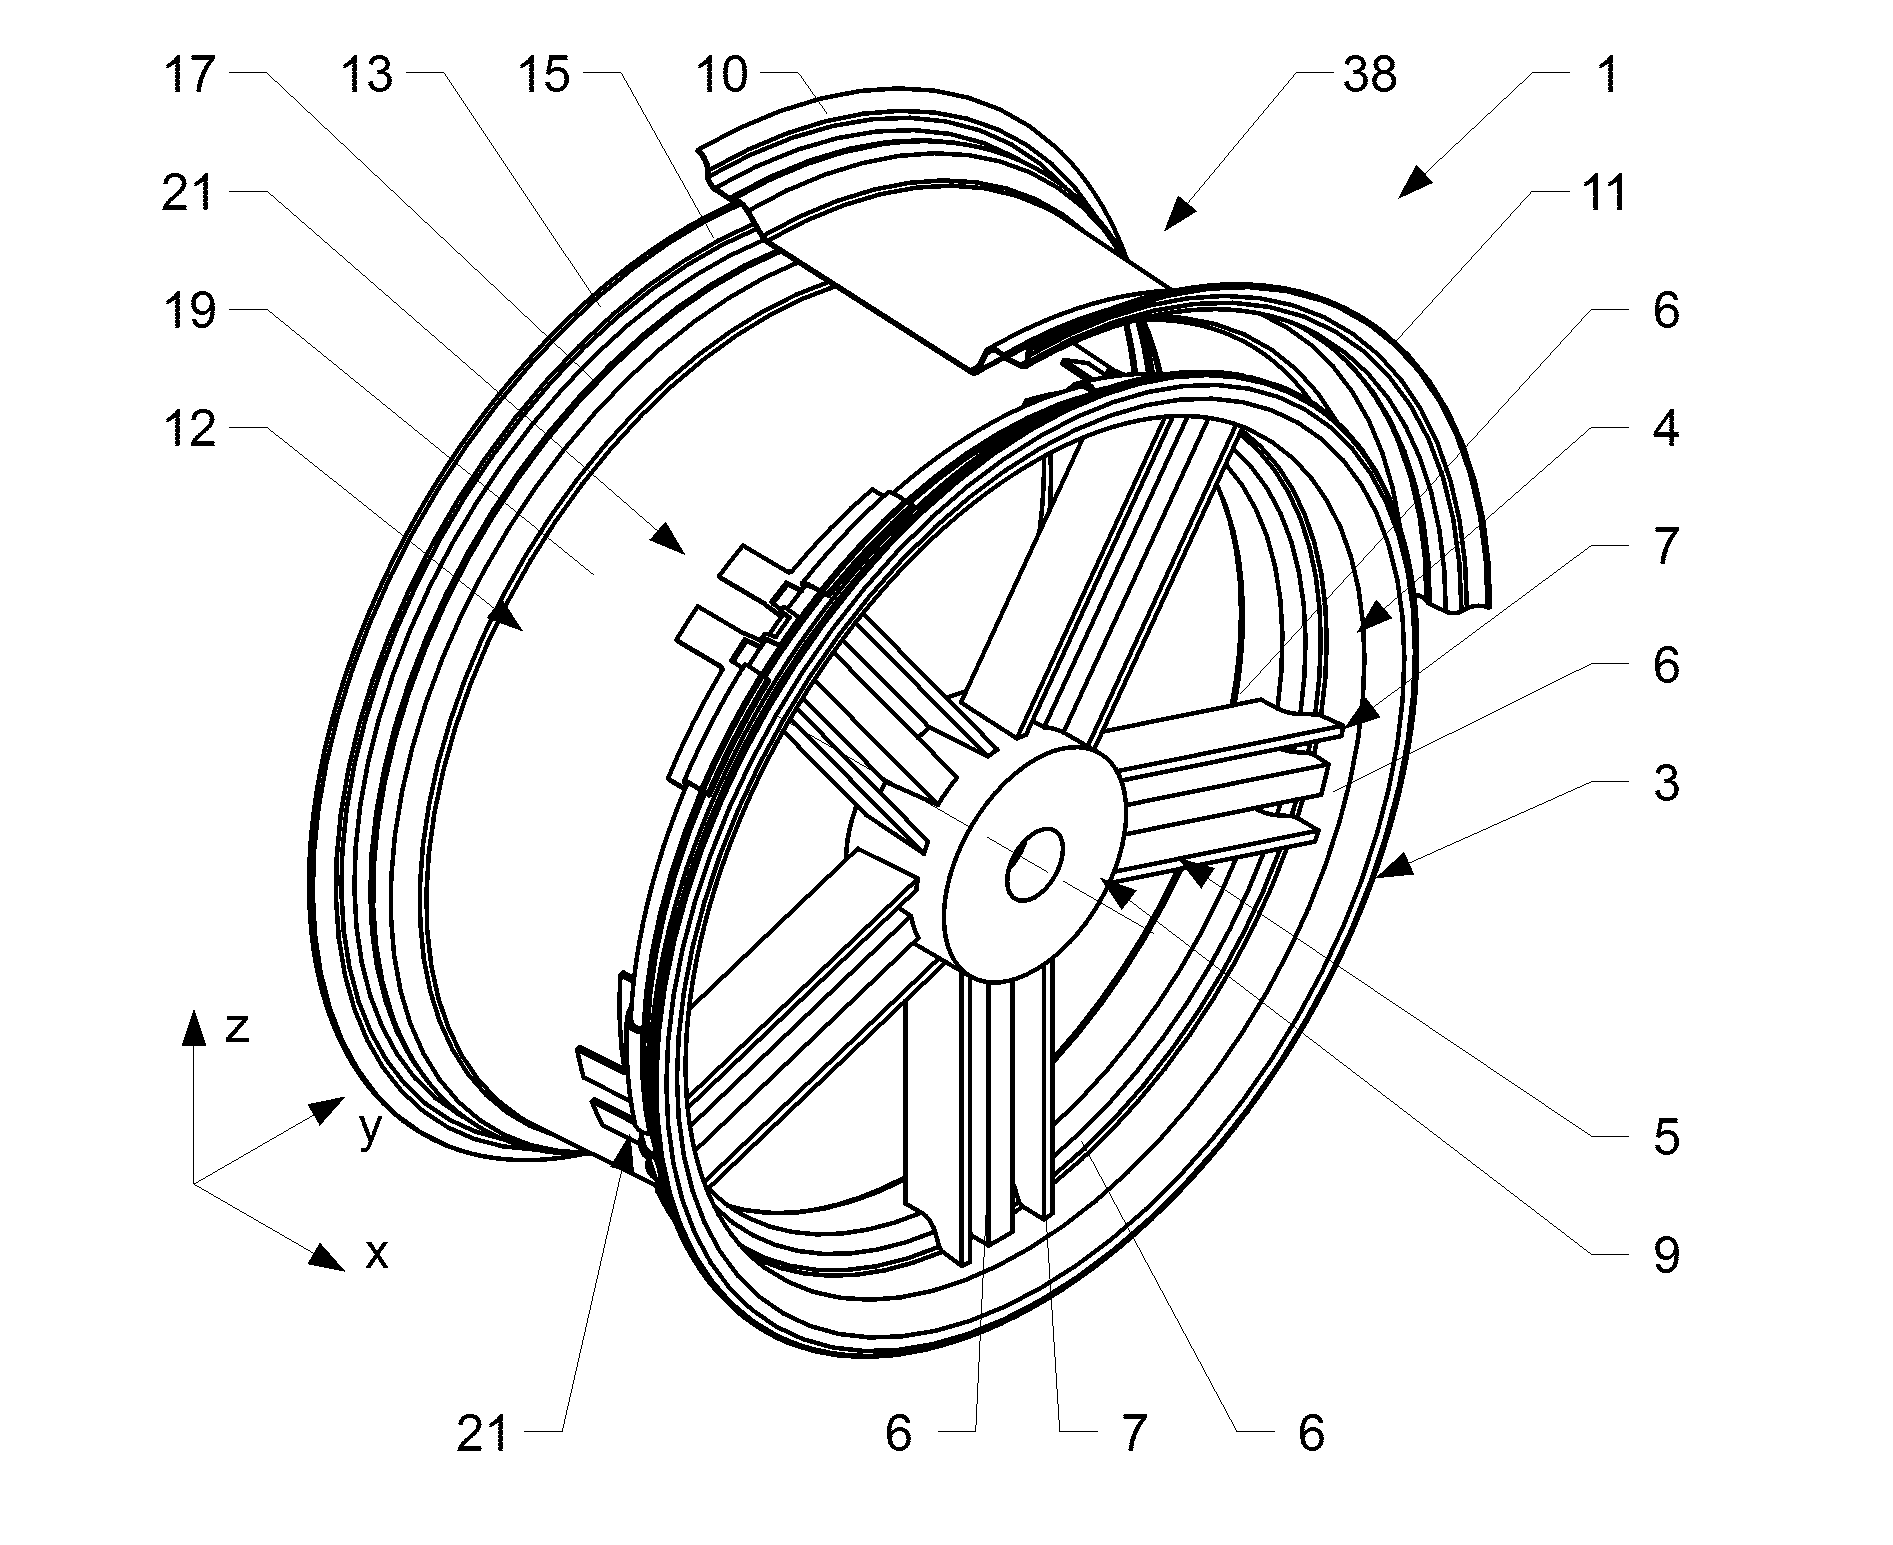 Wheel made out of a fiber reinforced plastic material